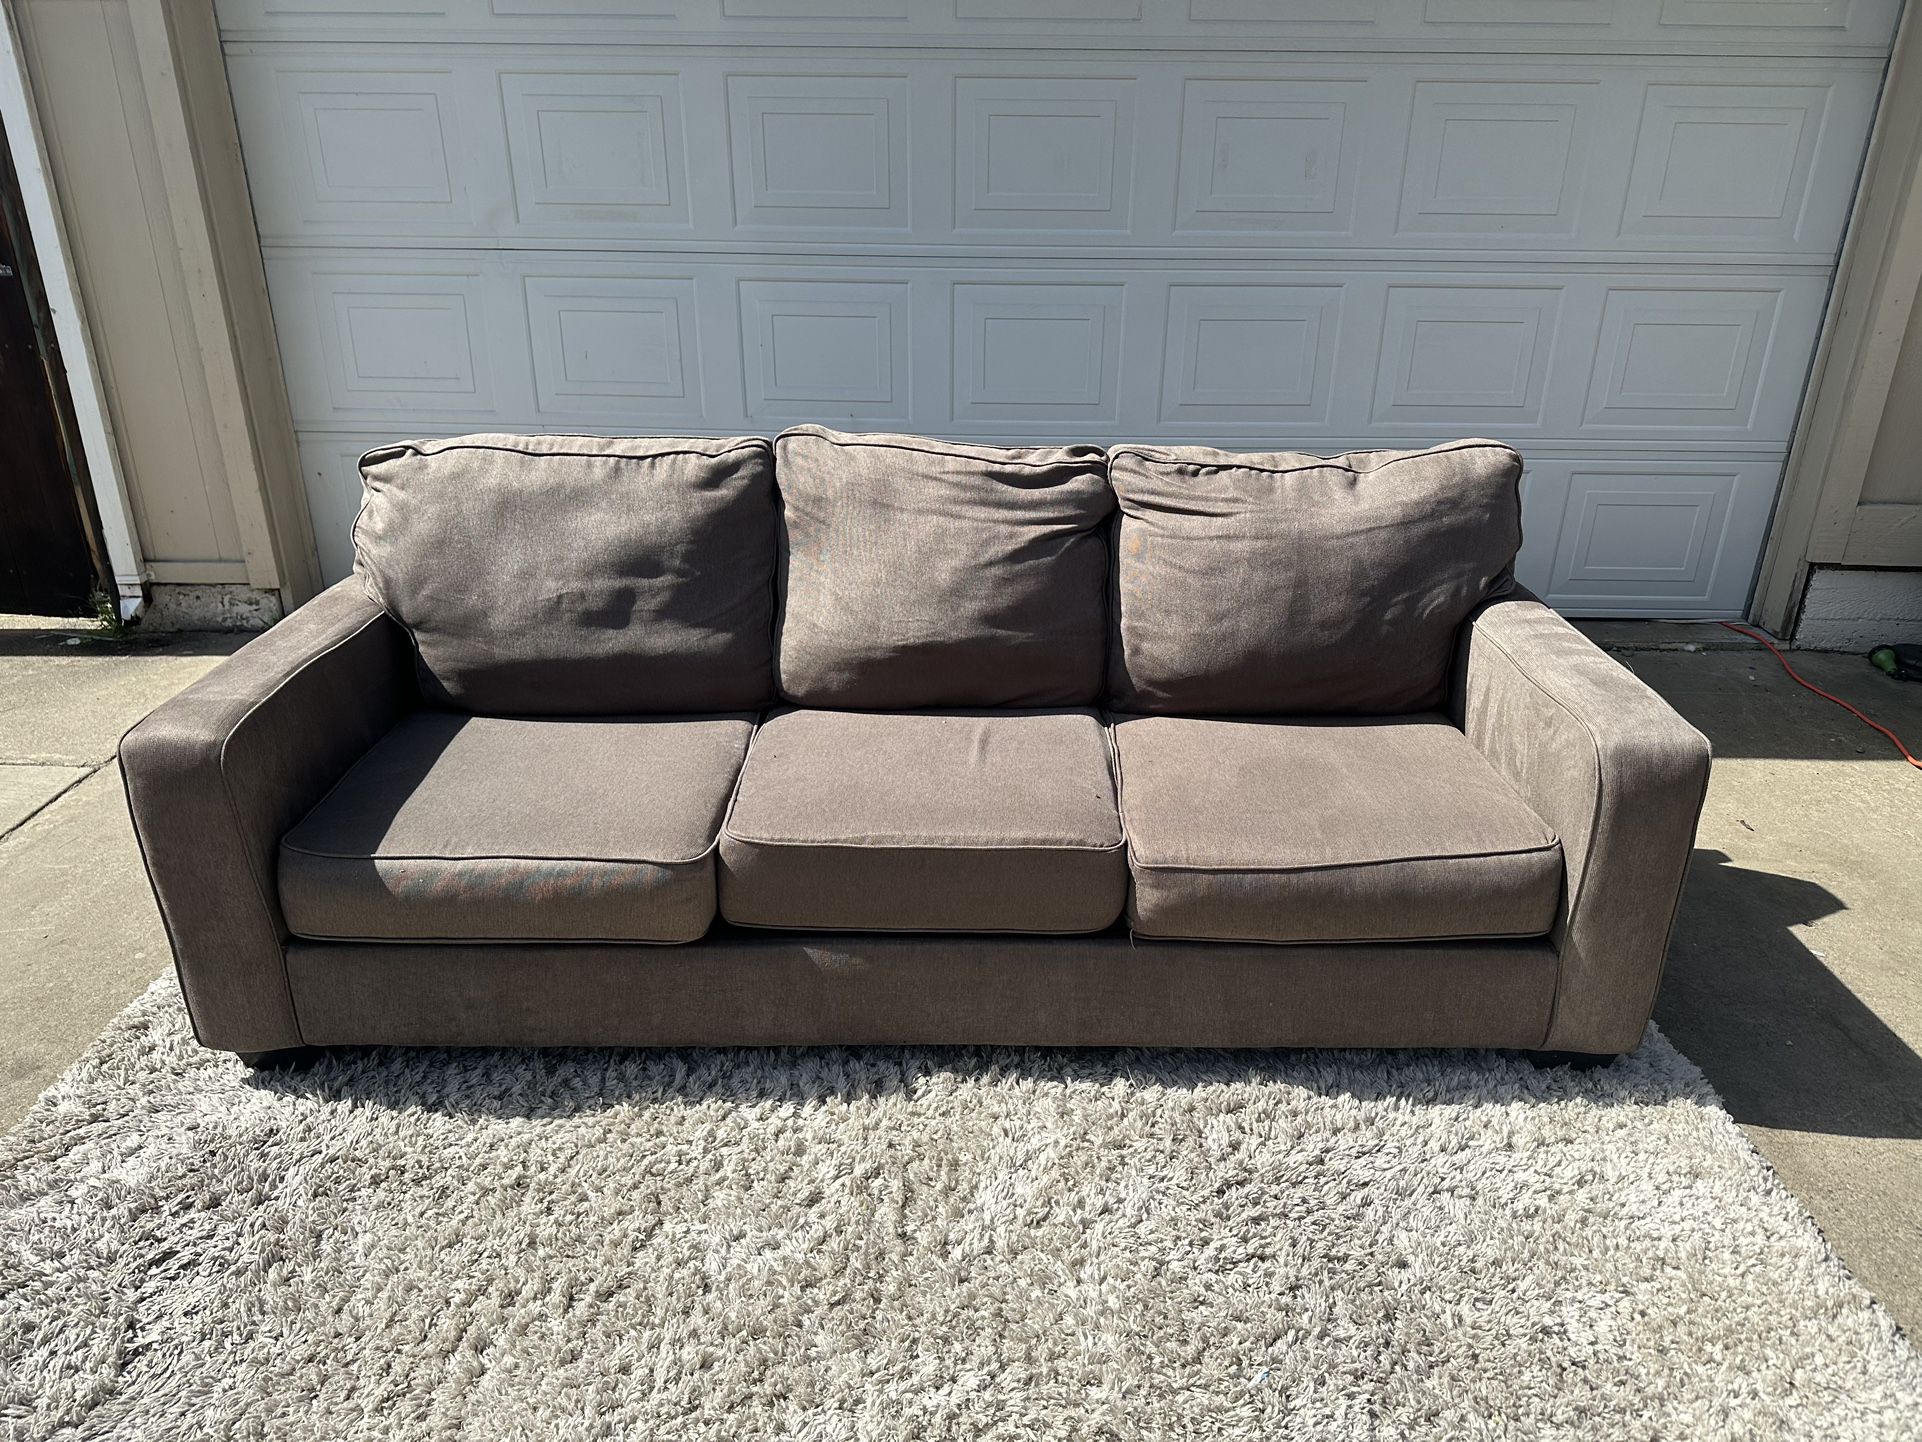 Free Delivery-Ashley furniture grayish brown sofa/couch retails 500